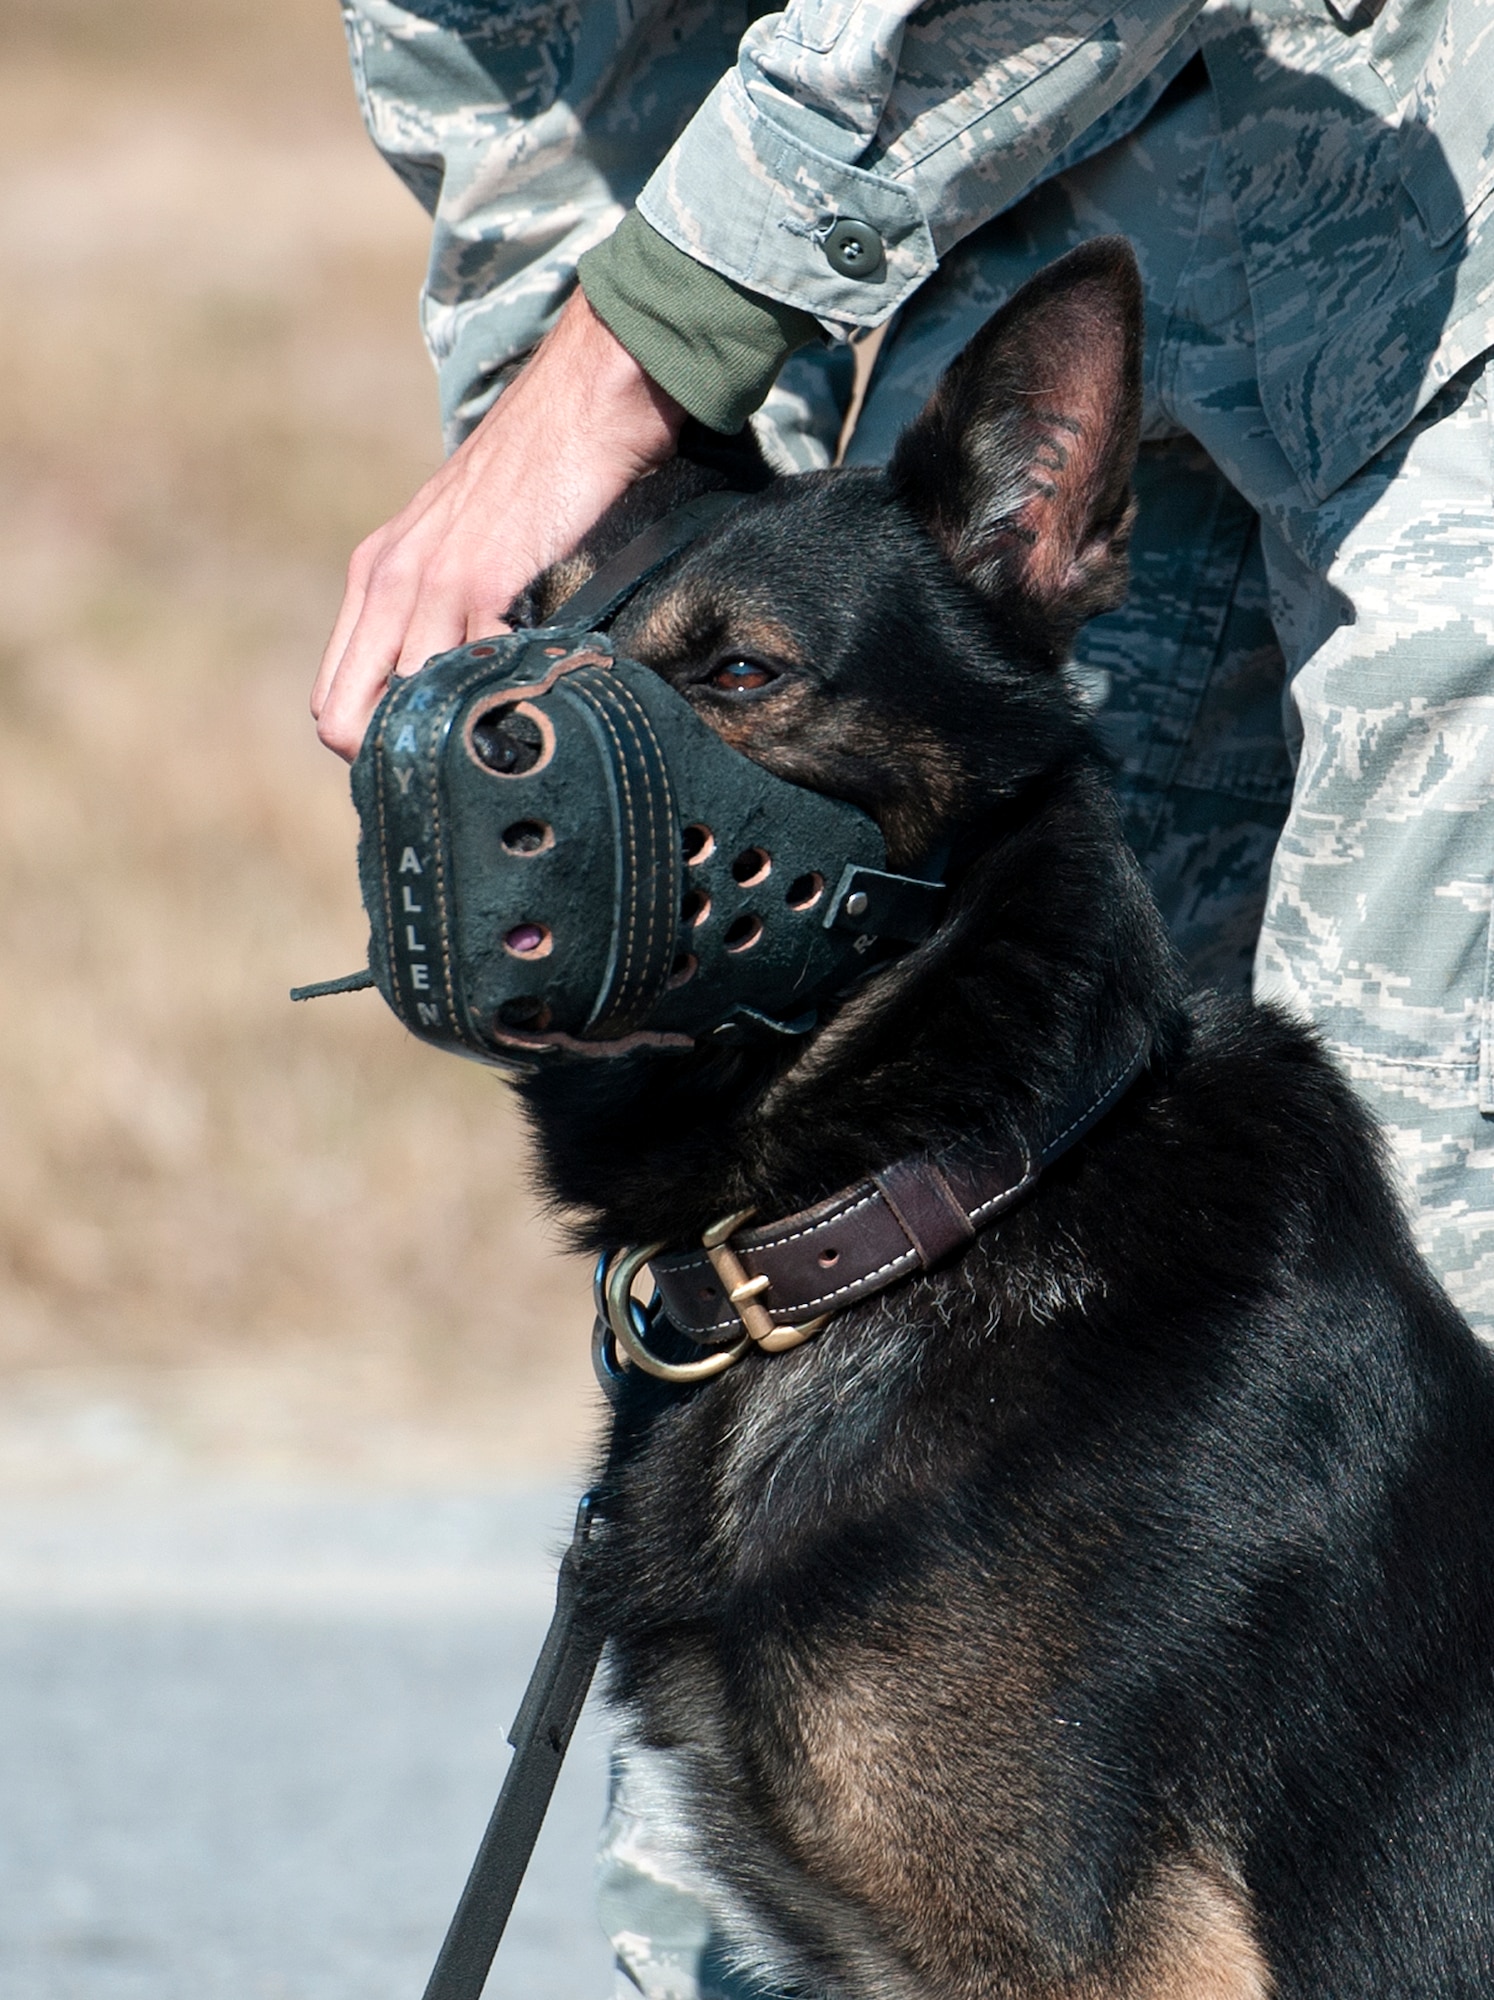 A muzzle is placed on an Air Force military working dog prior to a patrol scenario during the Emerald Coast K-9 Clash at Hurlburt Field, Fla., Nov. 15, 2014. Military working dog jobs require a high degree of obedience, they can work with or without a leash or harness and are taught when it is and isn’t appropriate to attack. (U.S. Air Force photo/Senior Airman Kentavist P. Brackin)